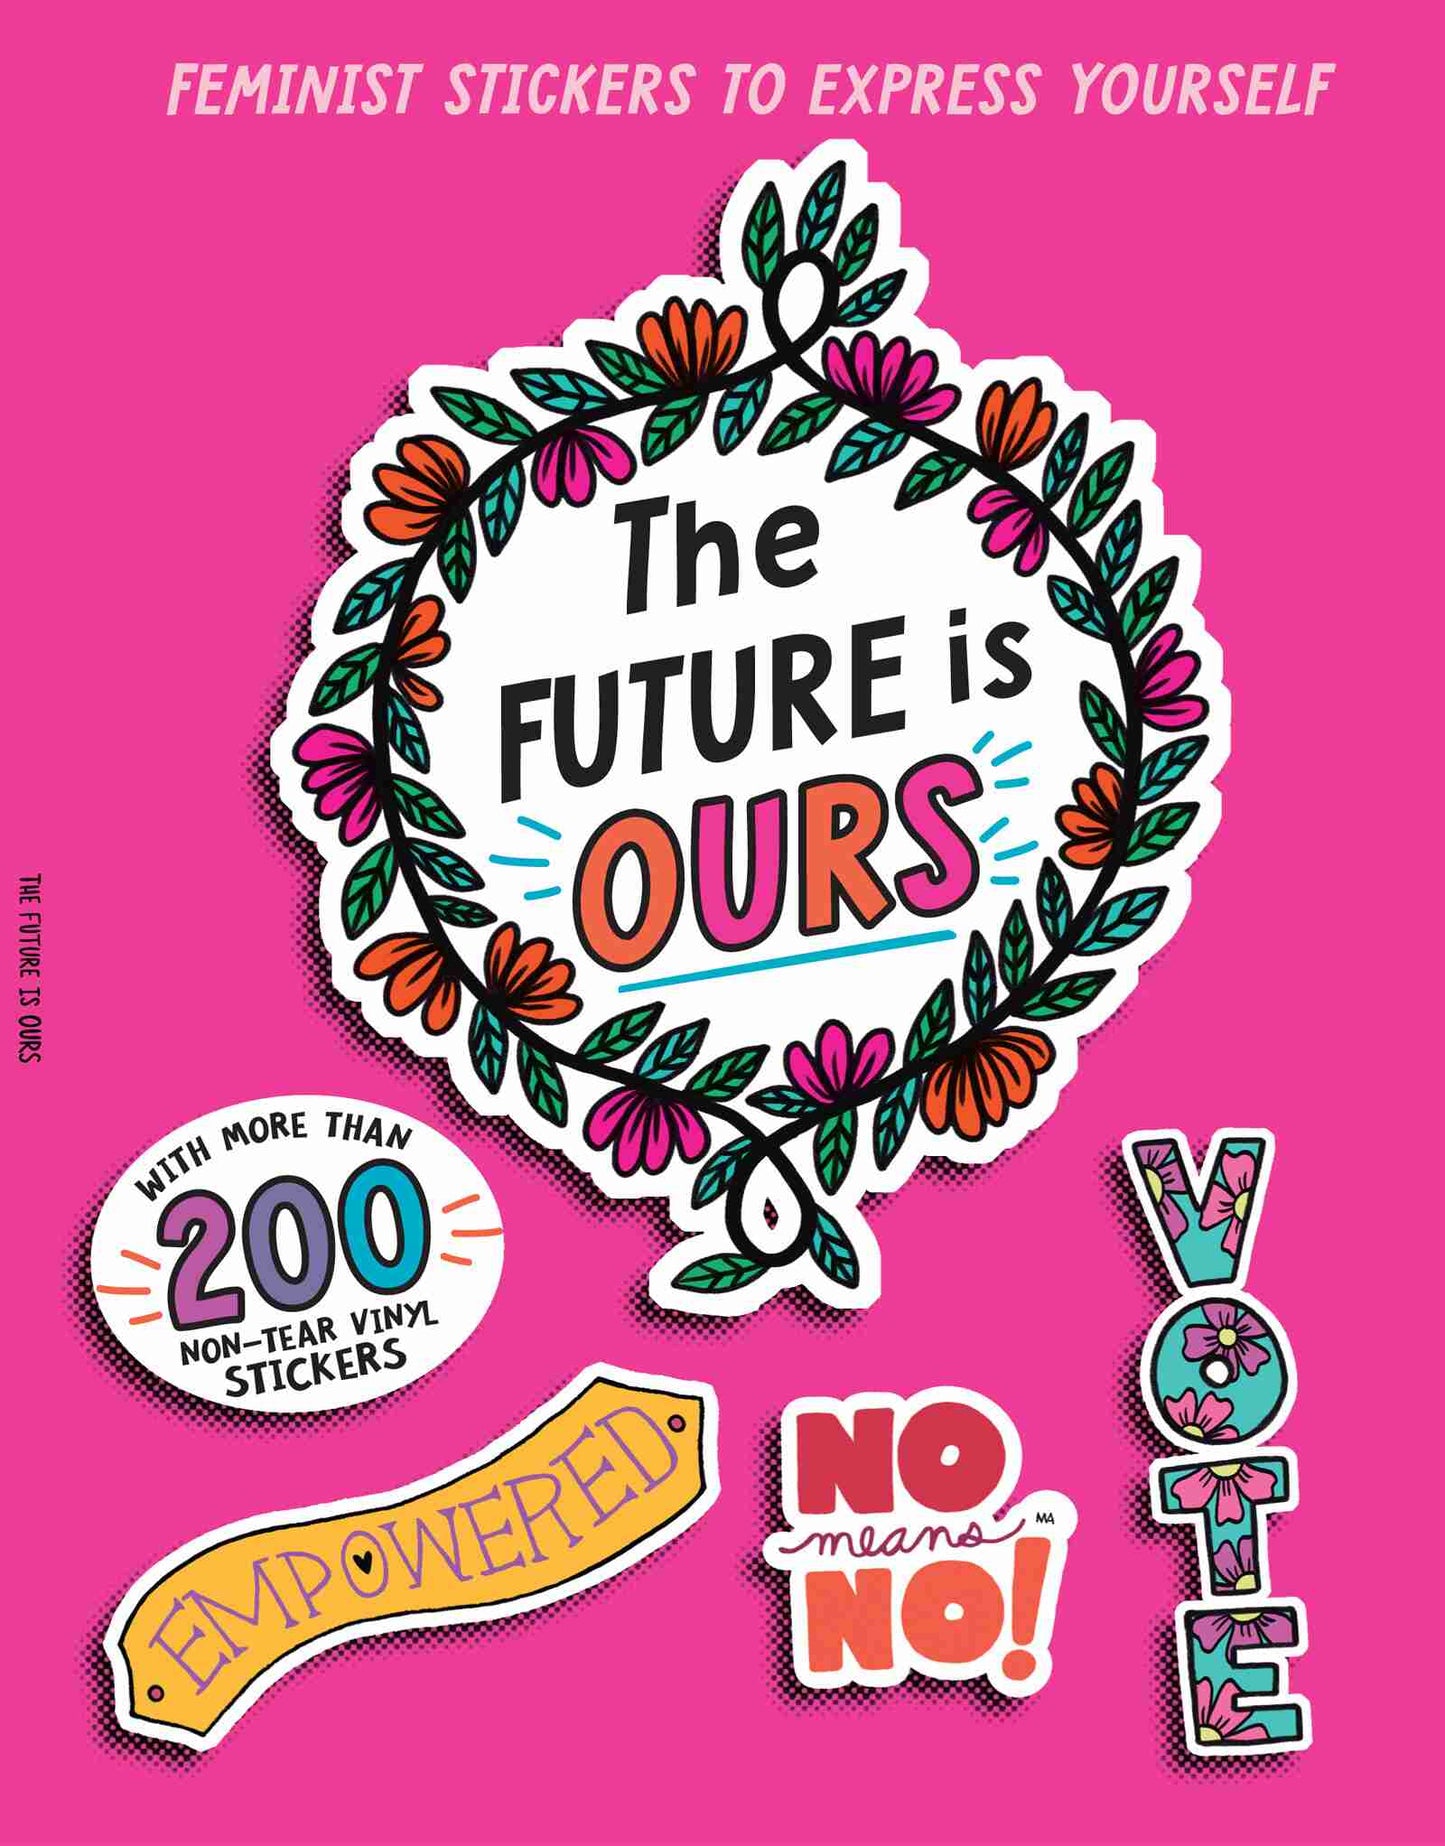 The Future Is Ours: Feminist Stickers to Express Yourself